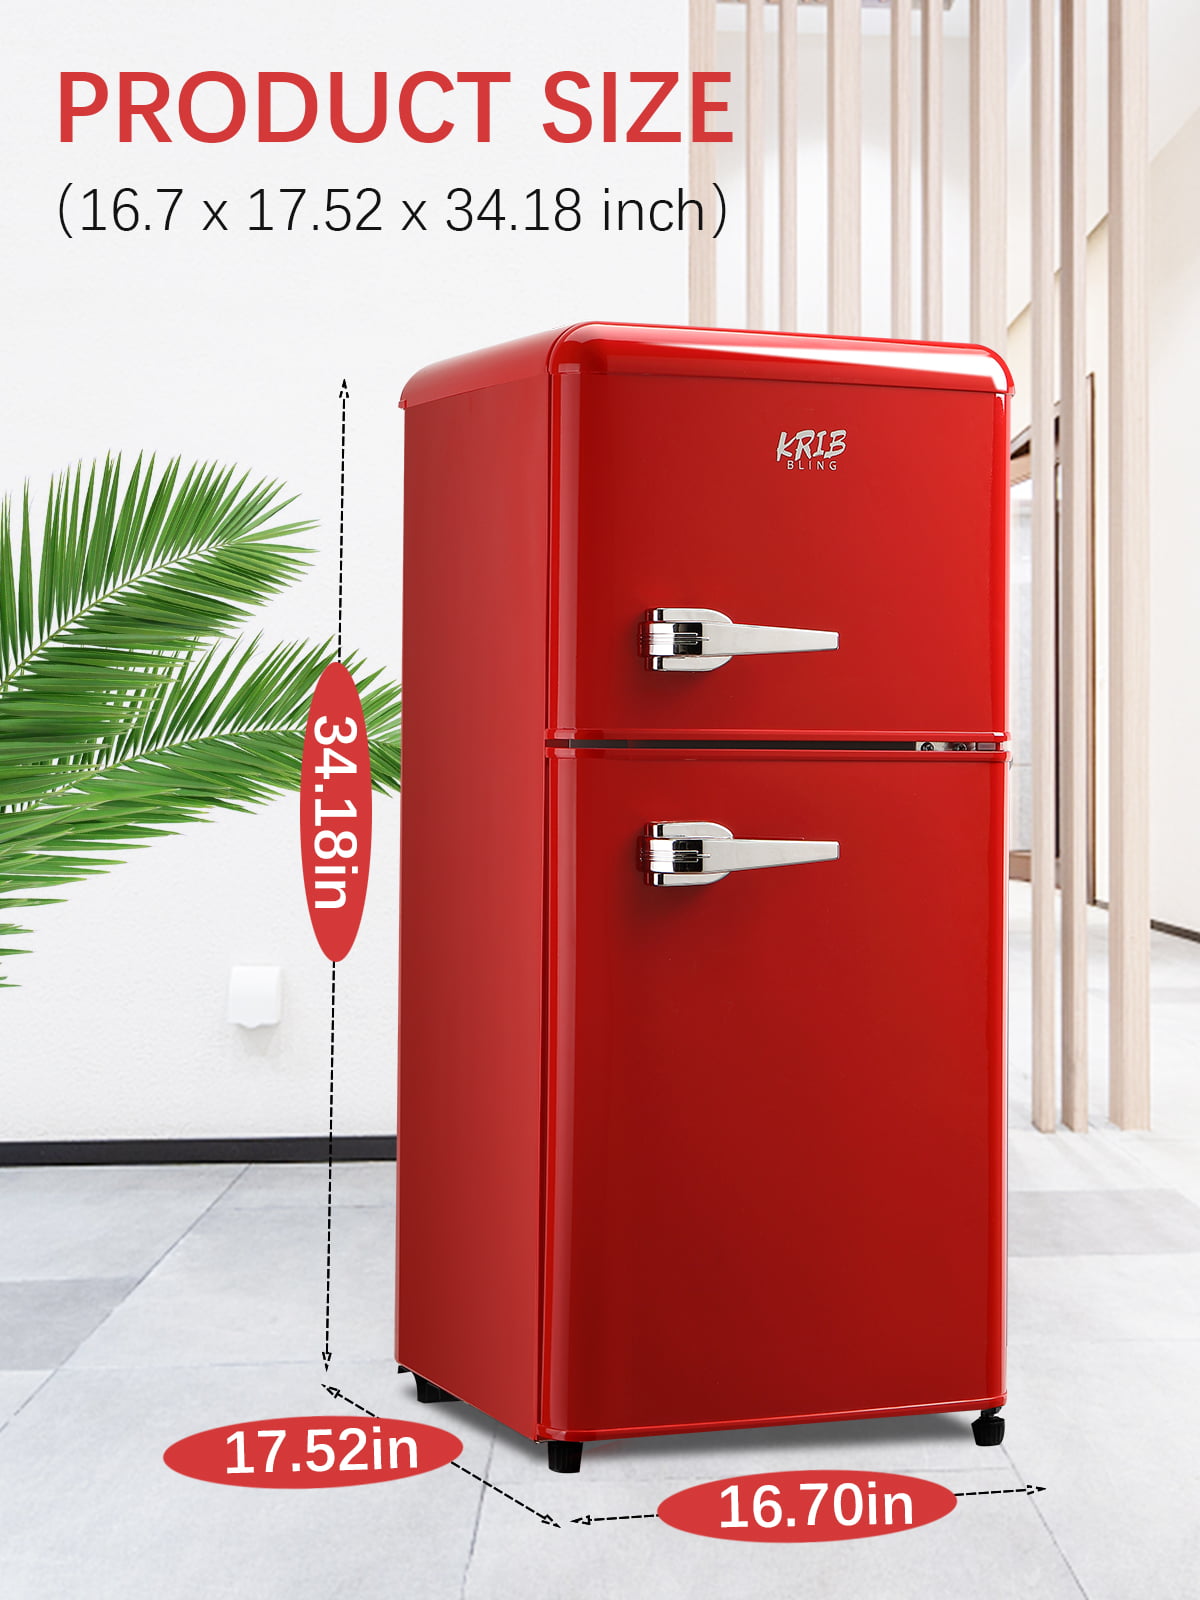 Krib Bling 3.5Cu.ft Compact Refrigerator with 7 Level Thermostat